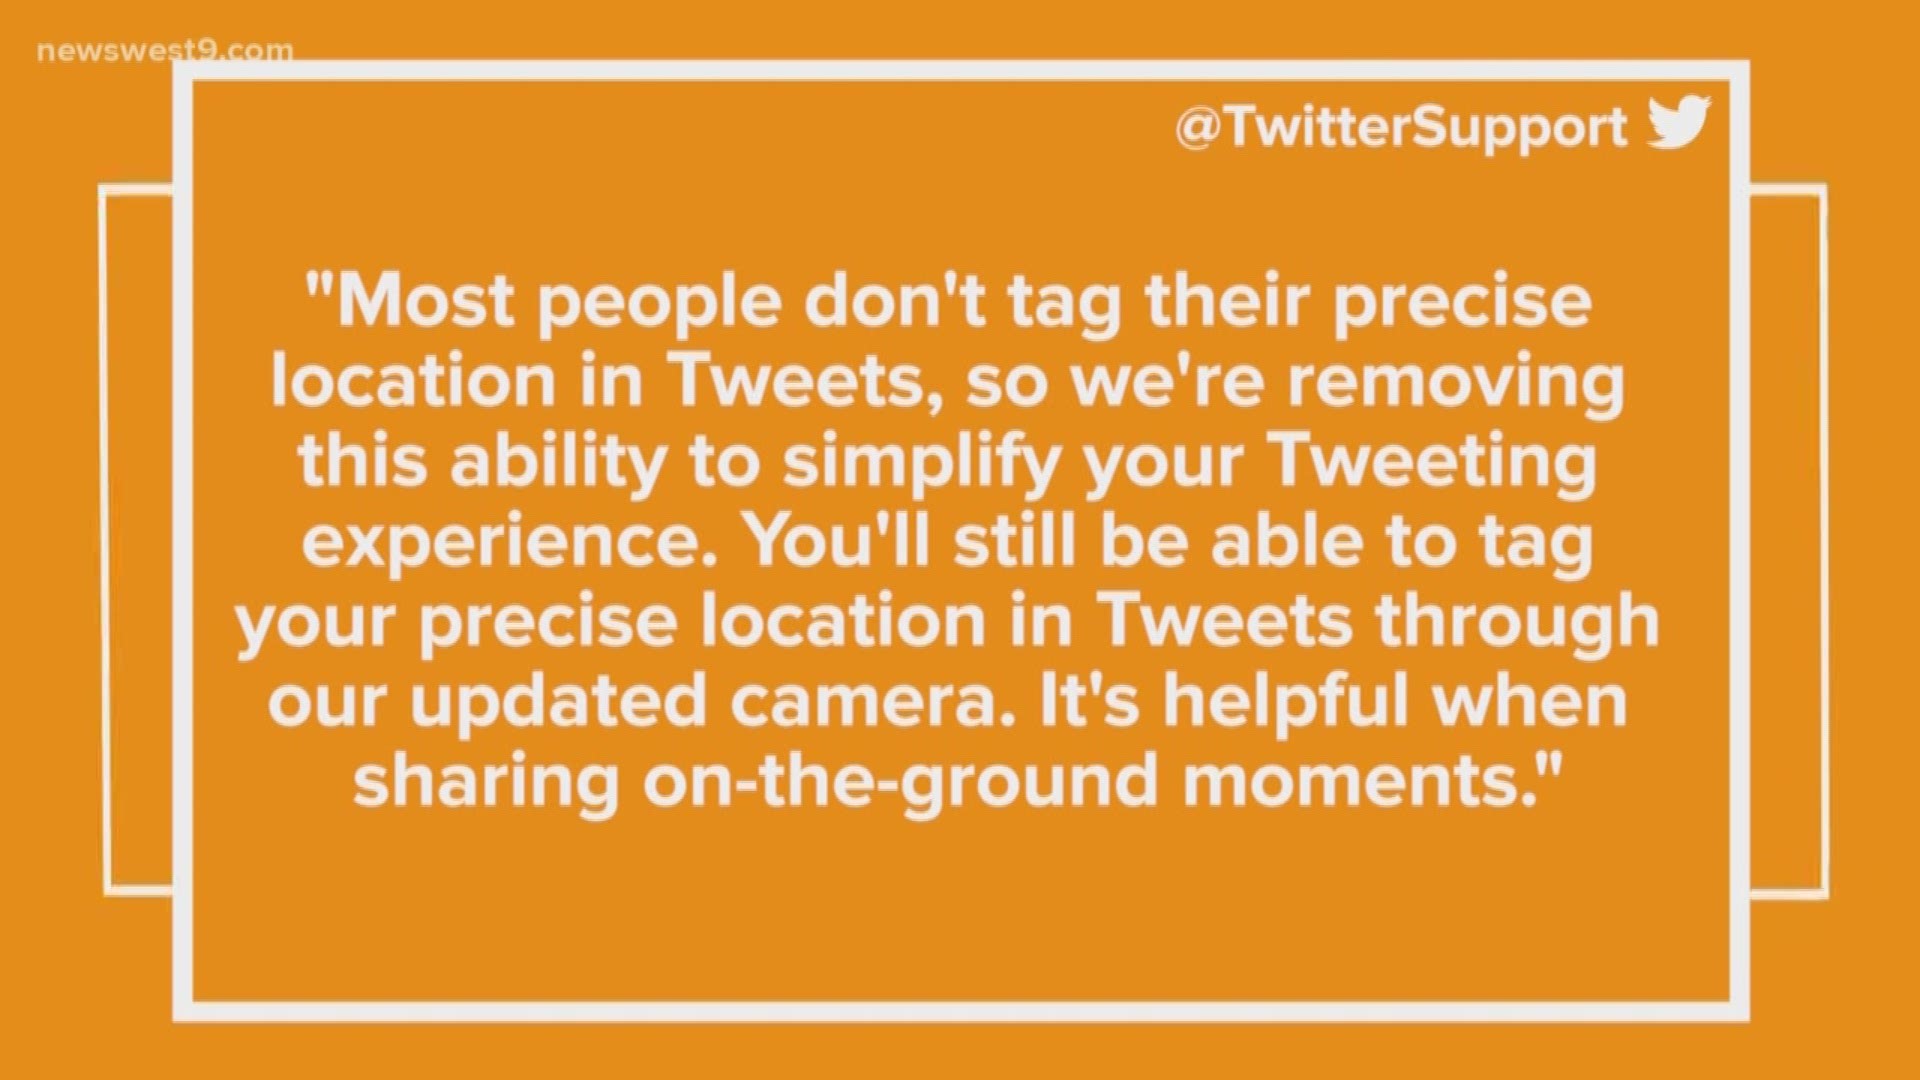 Twitter announced they will be dropping their precise location feature.